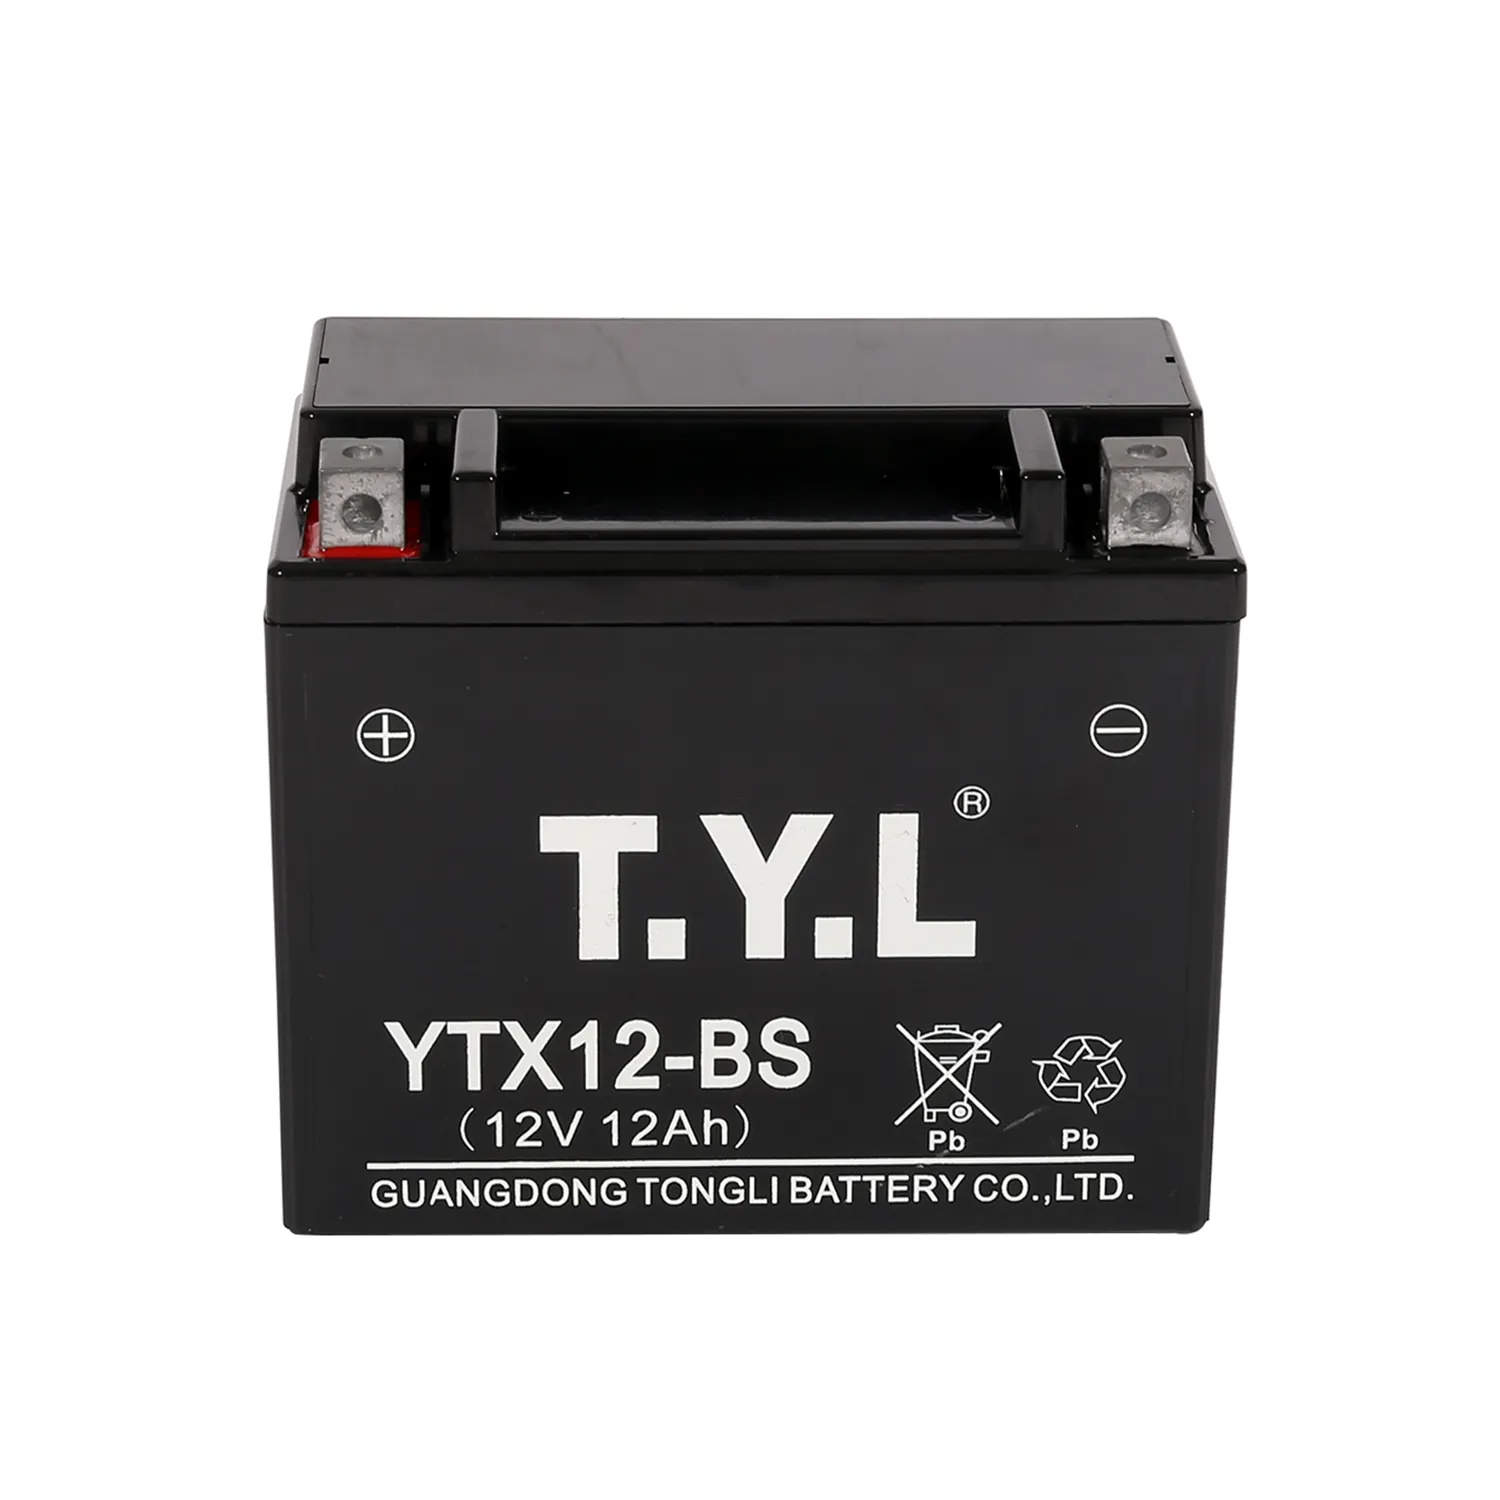 China 12v motorcycle starting battery YTX12 BS motorcycle battery 12v 12ah lead acid battery for motorcycle scooter